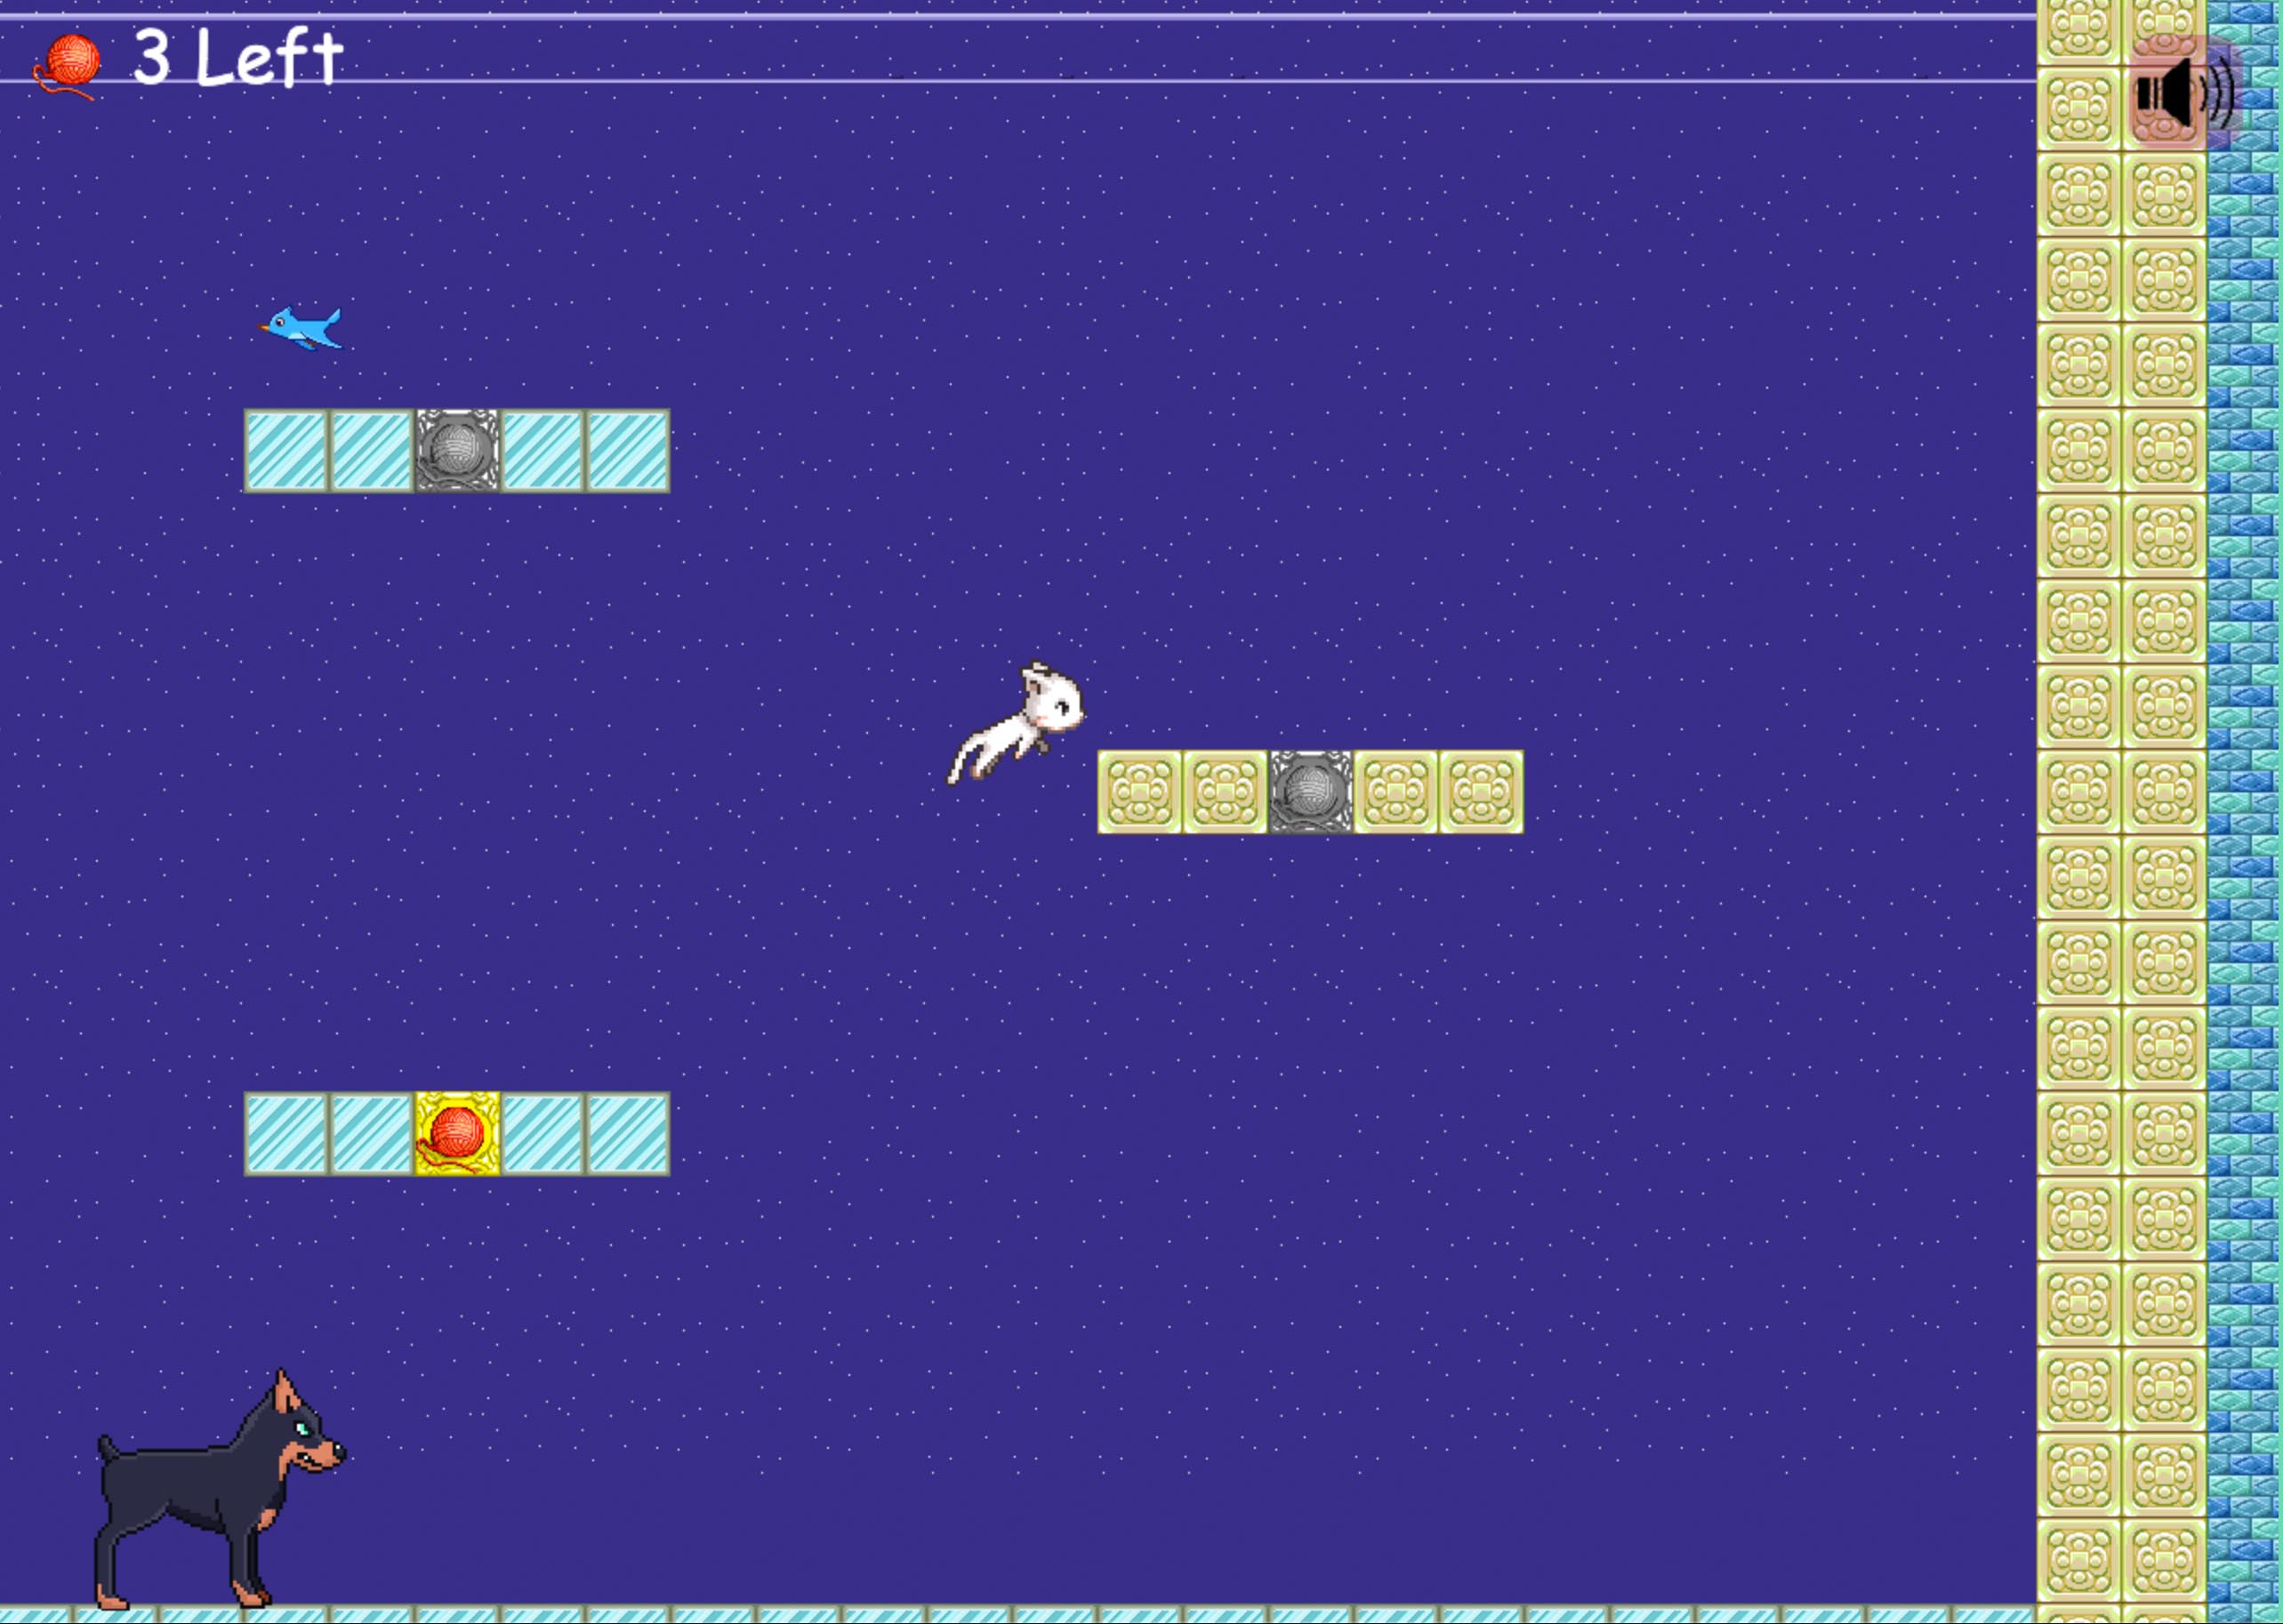 This is a screenshot from Poetry Cat. The player is jumping toward a yarn ball while a doberman patrols and icy floor.